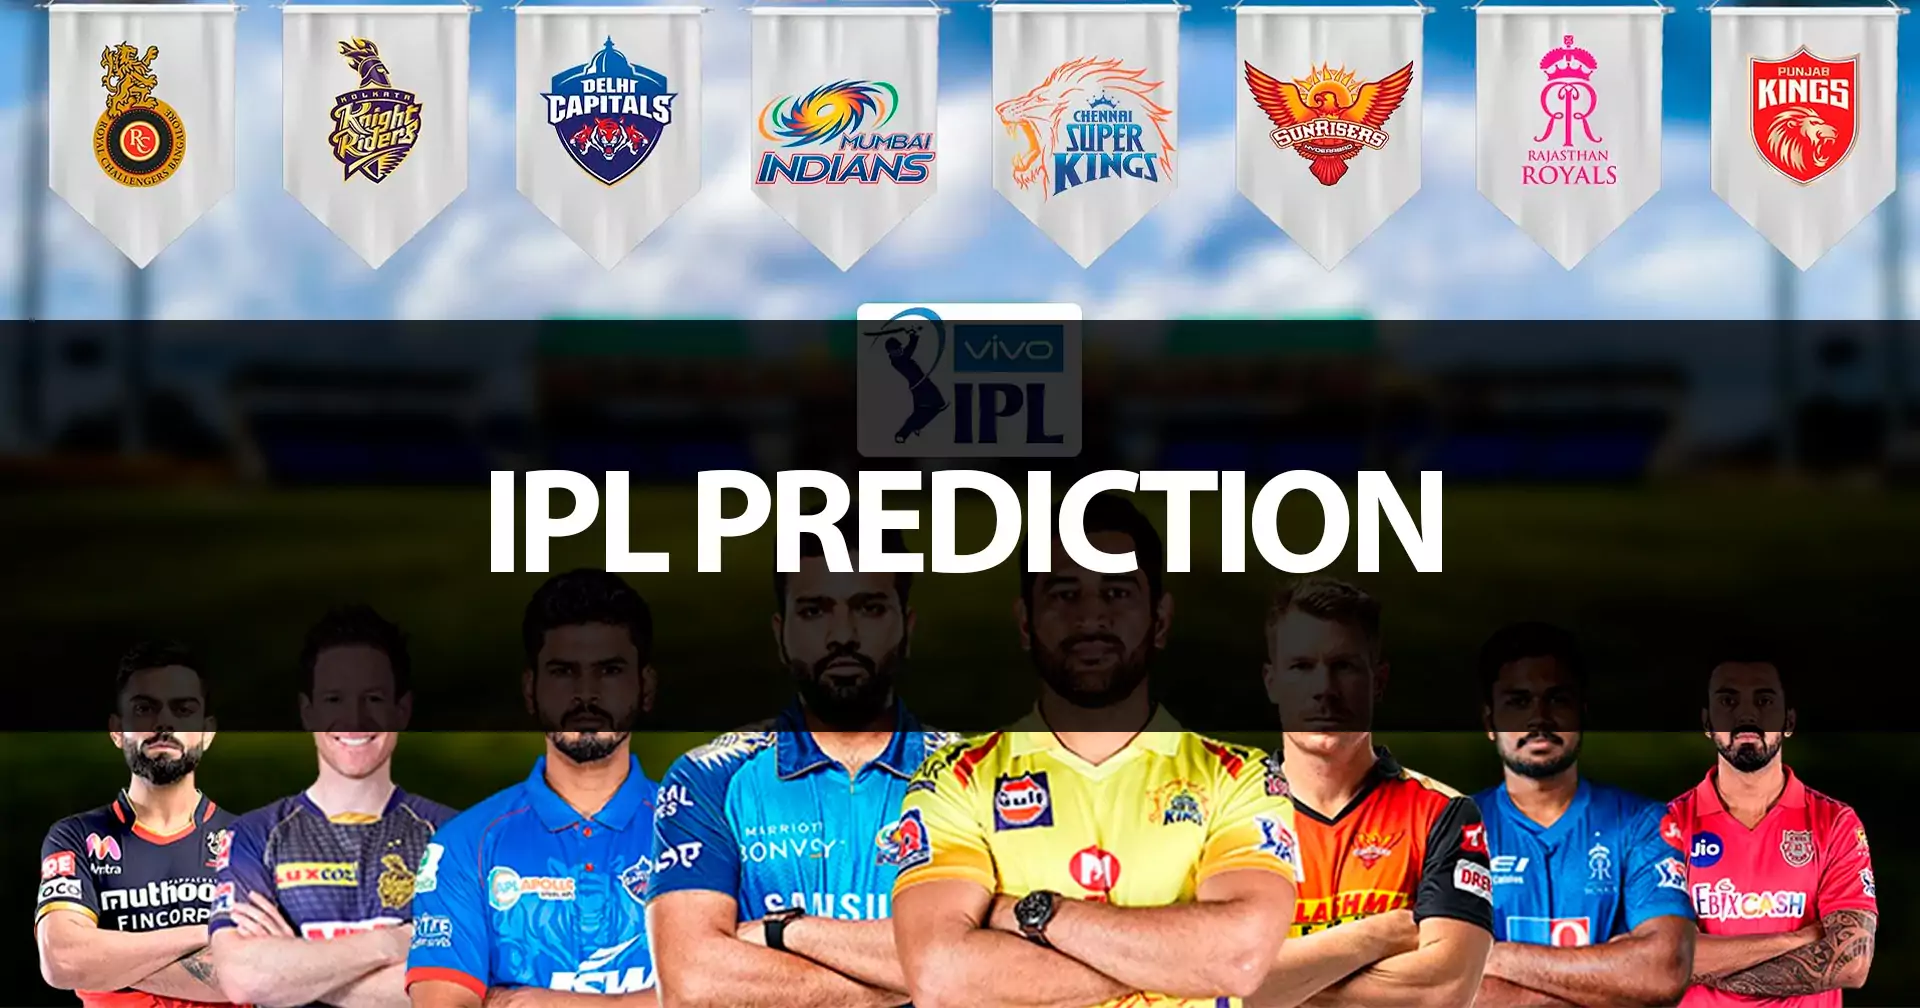 Look for the IPL prediction and stufy it before cricket betting.